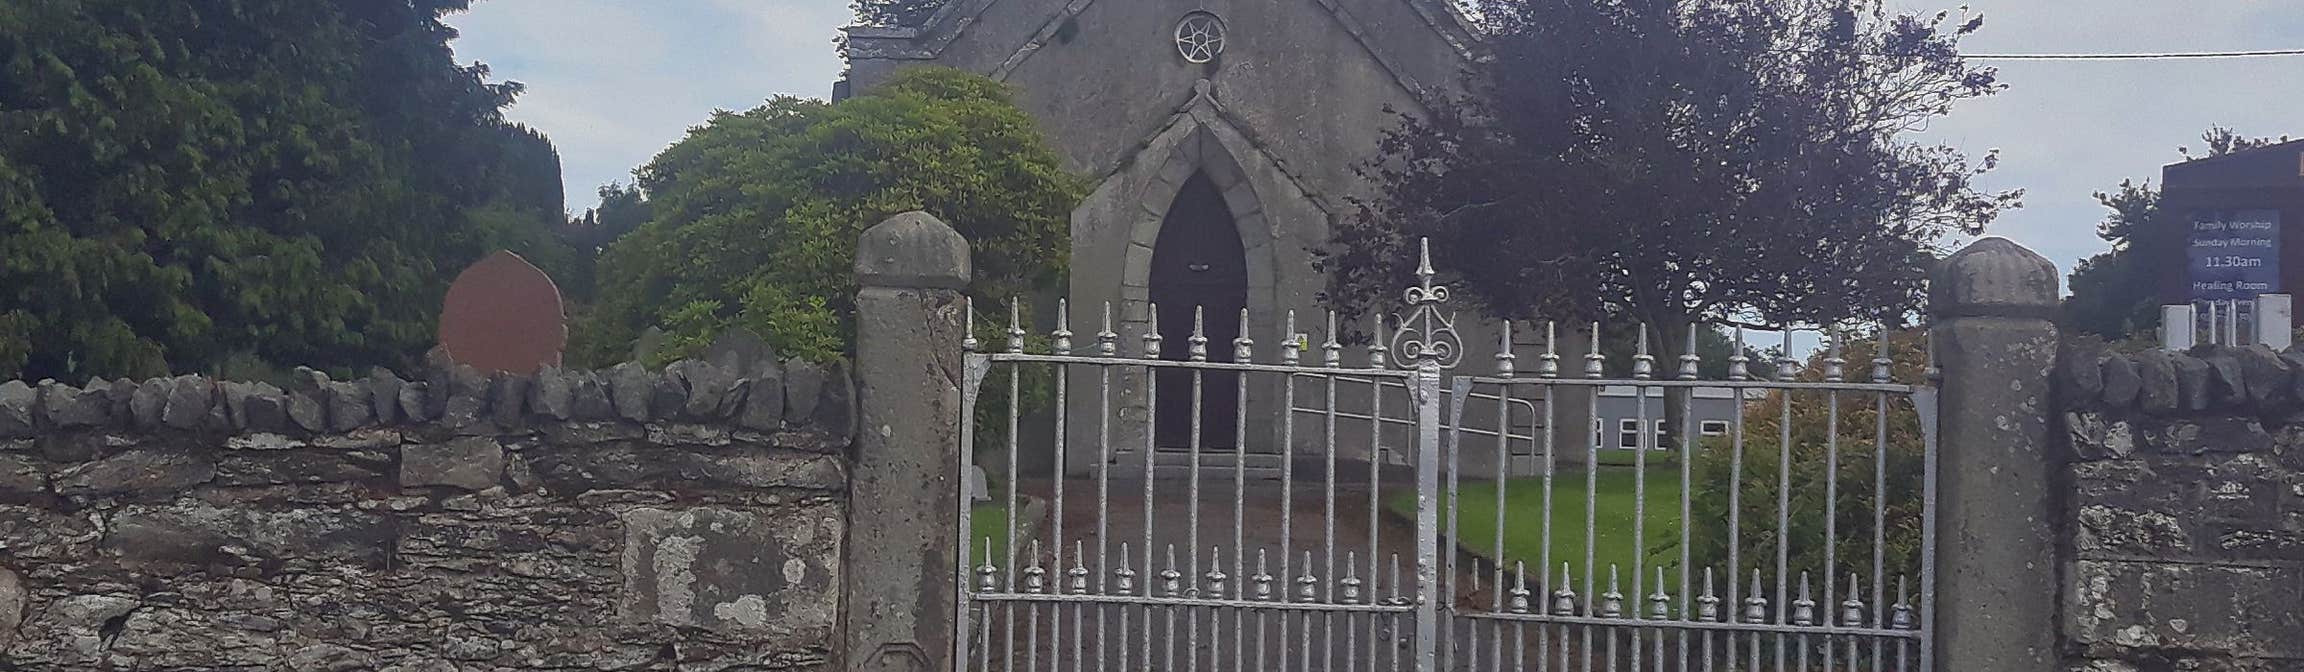 Image of a church in Redcross in County Wicklow